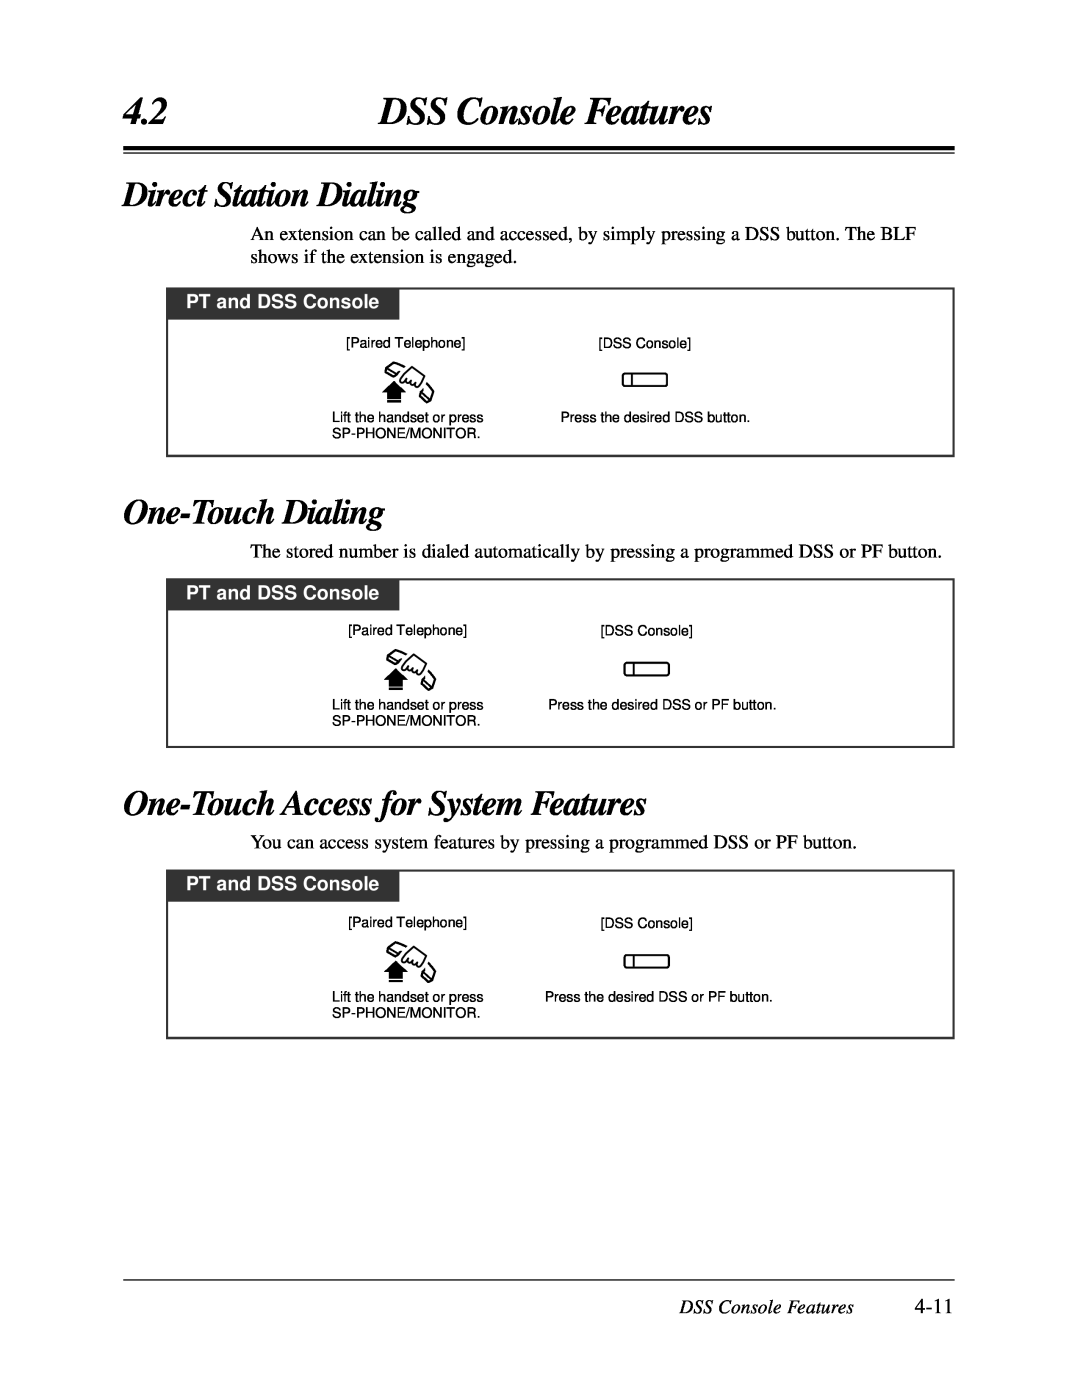 Panasonic KX-TA624 user manual Direct Station Dialing, One-TouchAccess for System Features, 4-11, DSS Console Features 